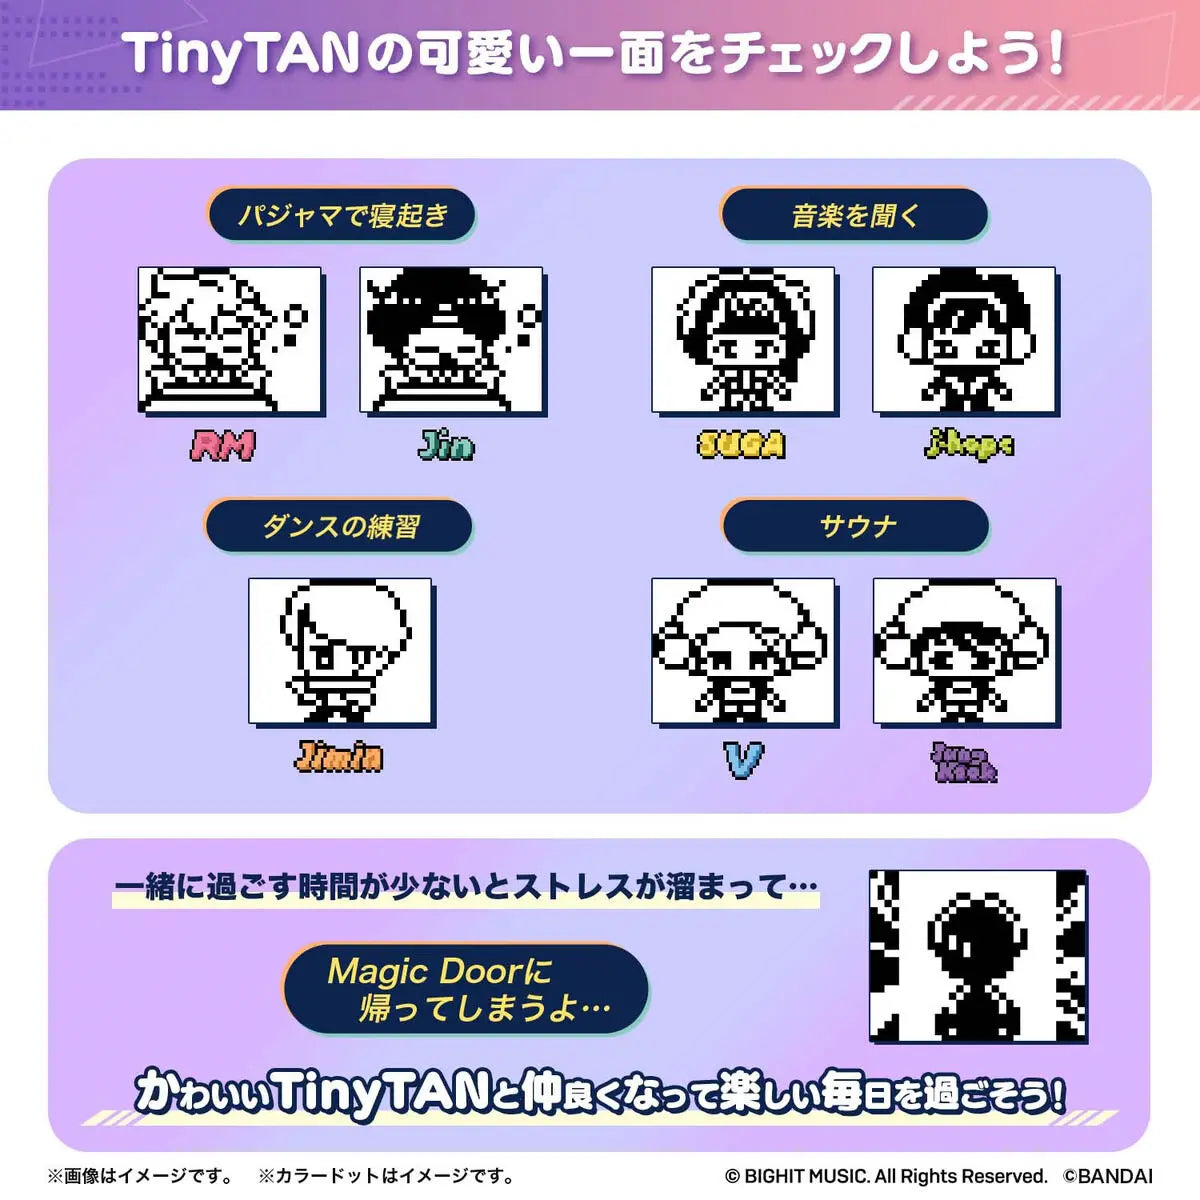 Meet Your BTS Bangtan Boys TinyTan Tamagotchi: Genuine Bandai Electronic Pets with Digital Screen. Experience Interactive Fun with These Virtual Cyber Pets